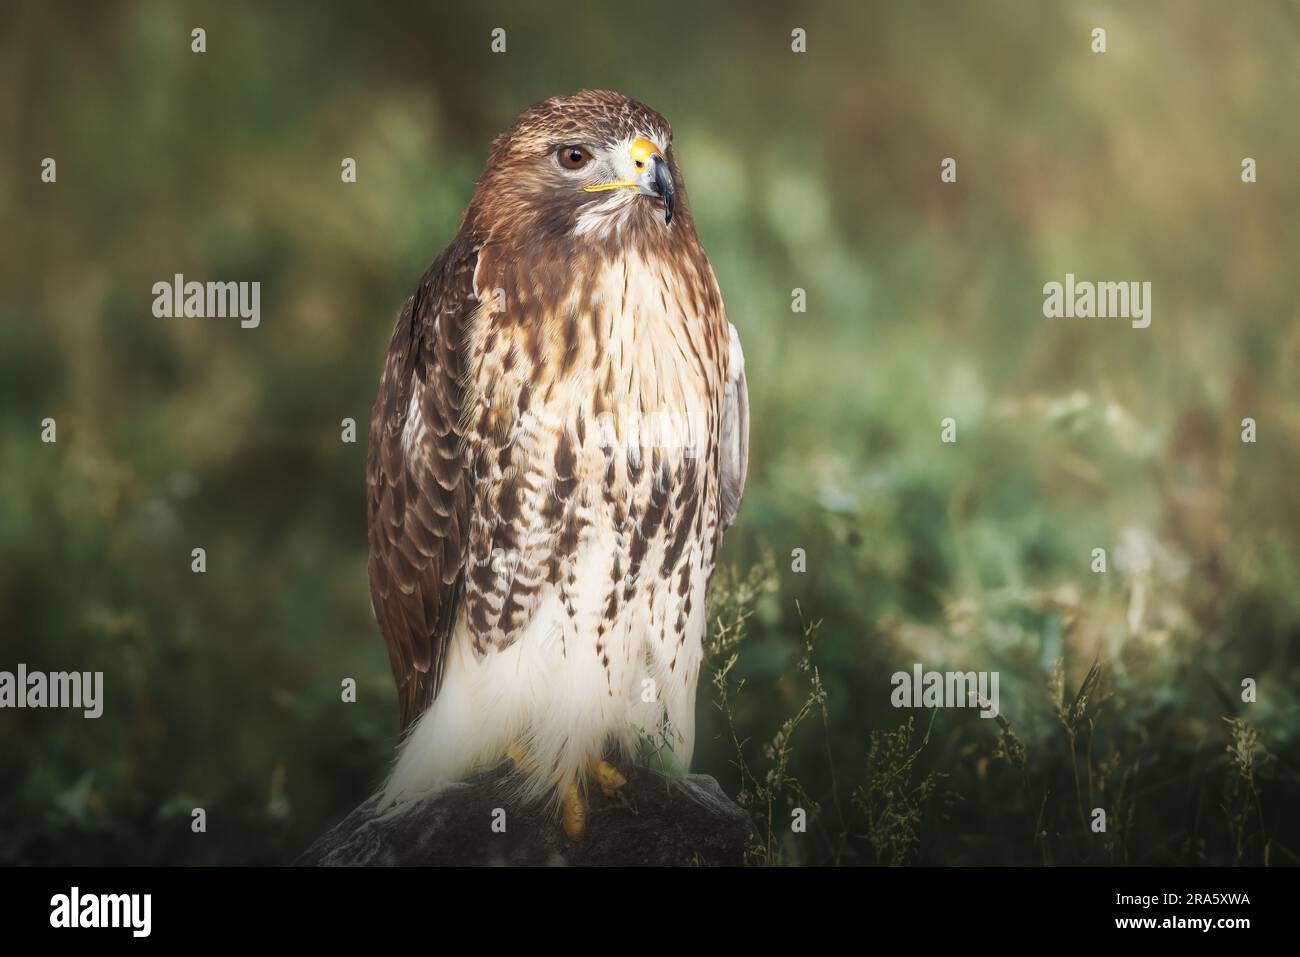 Red-tailed hawk (Buteo jamaicensis) Stock Photo